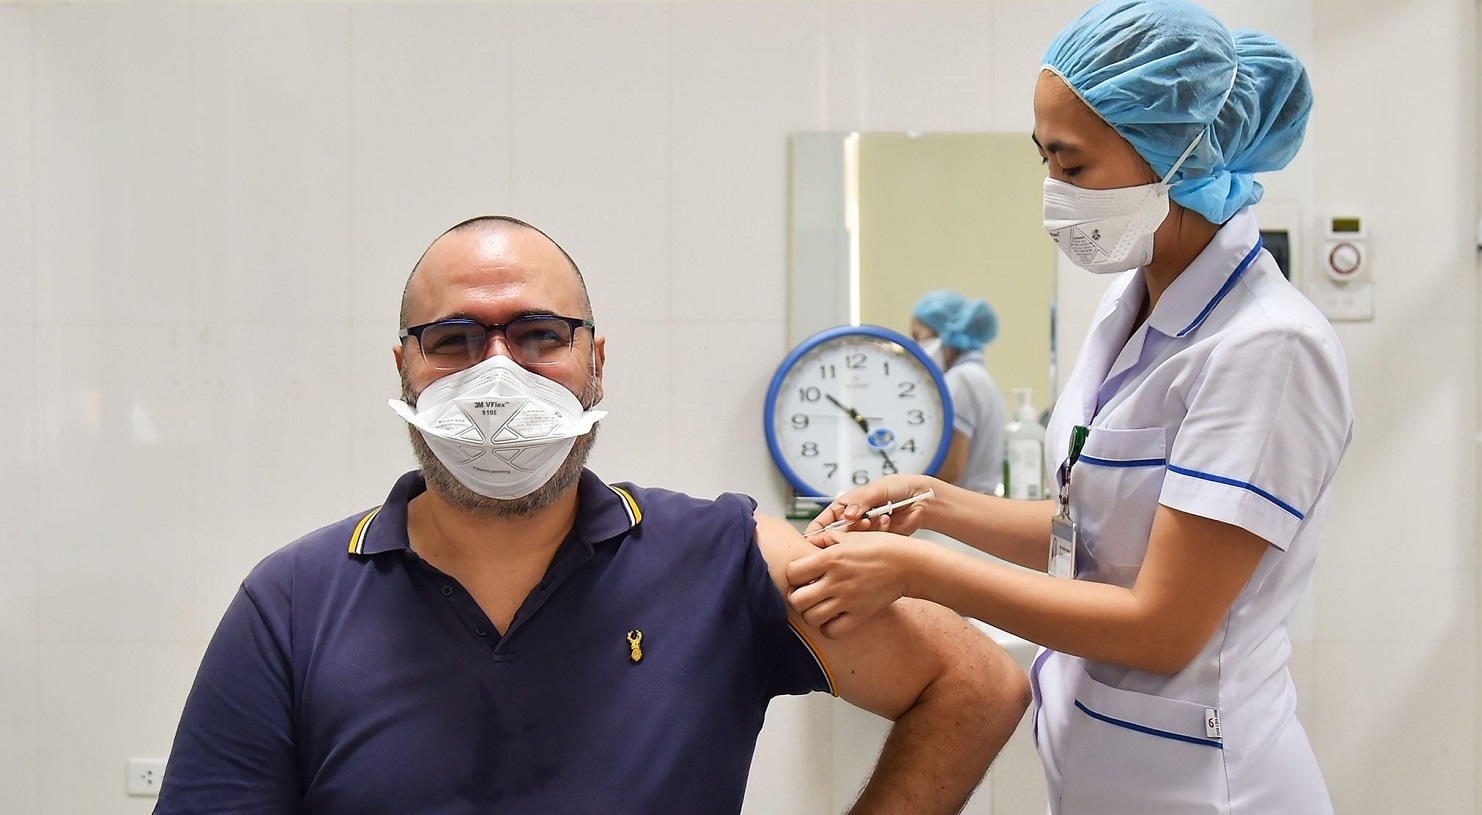 All expats possibly enjoy equitable Covid vaccination access in Vietnam